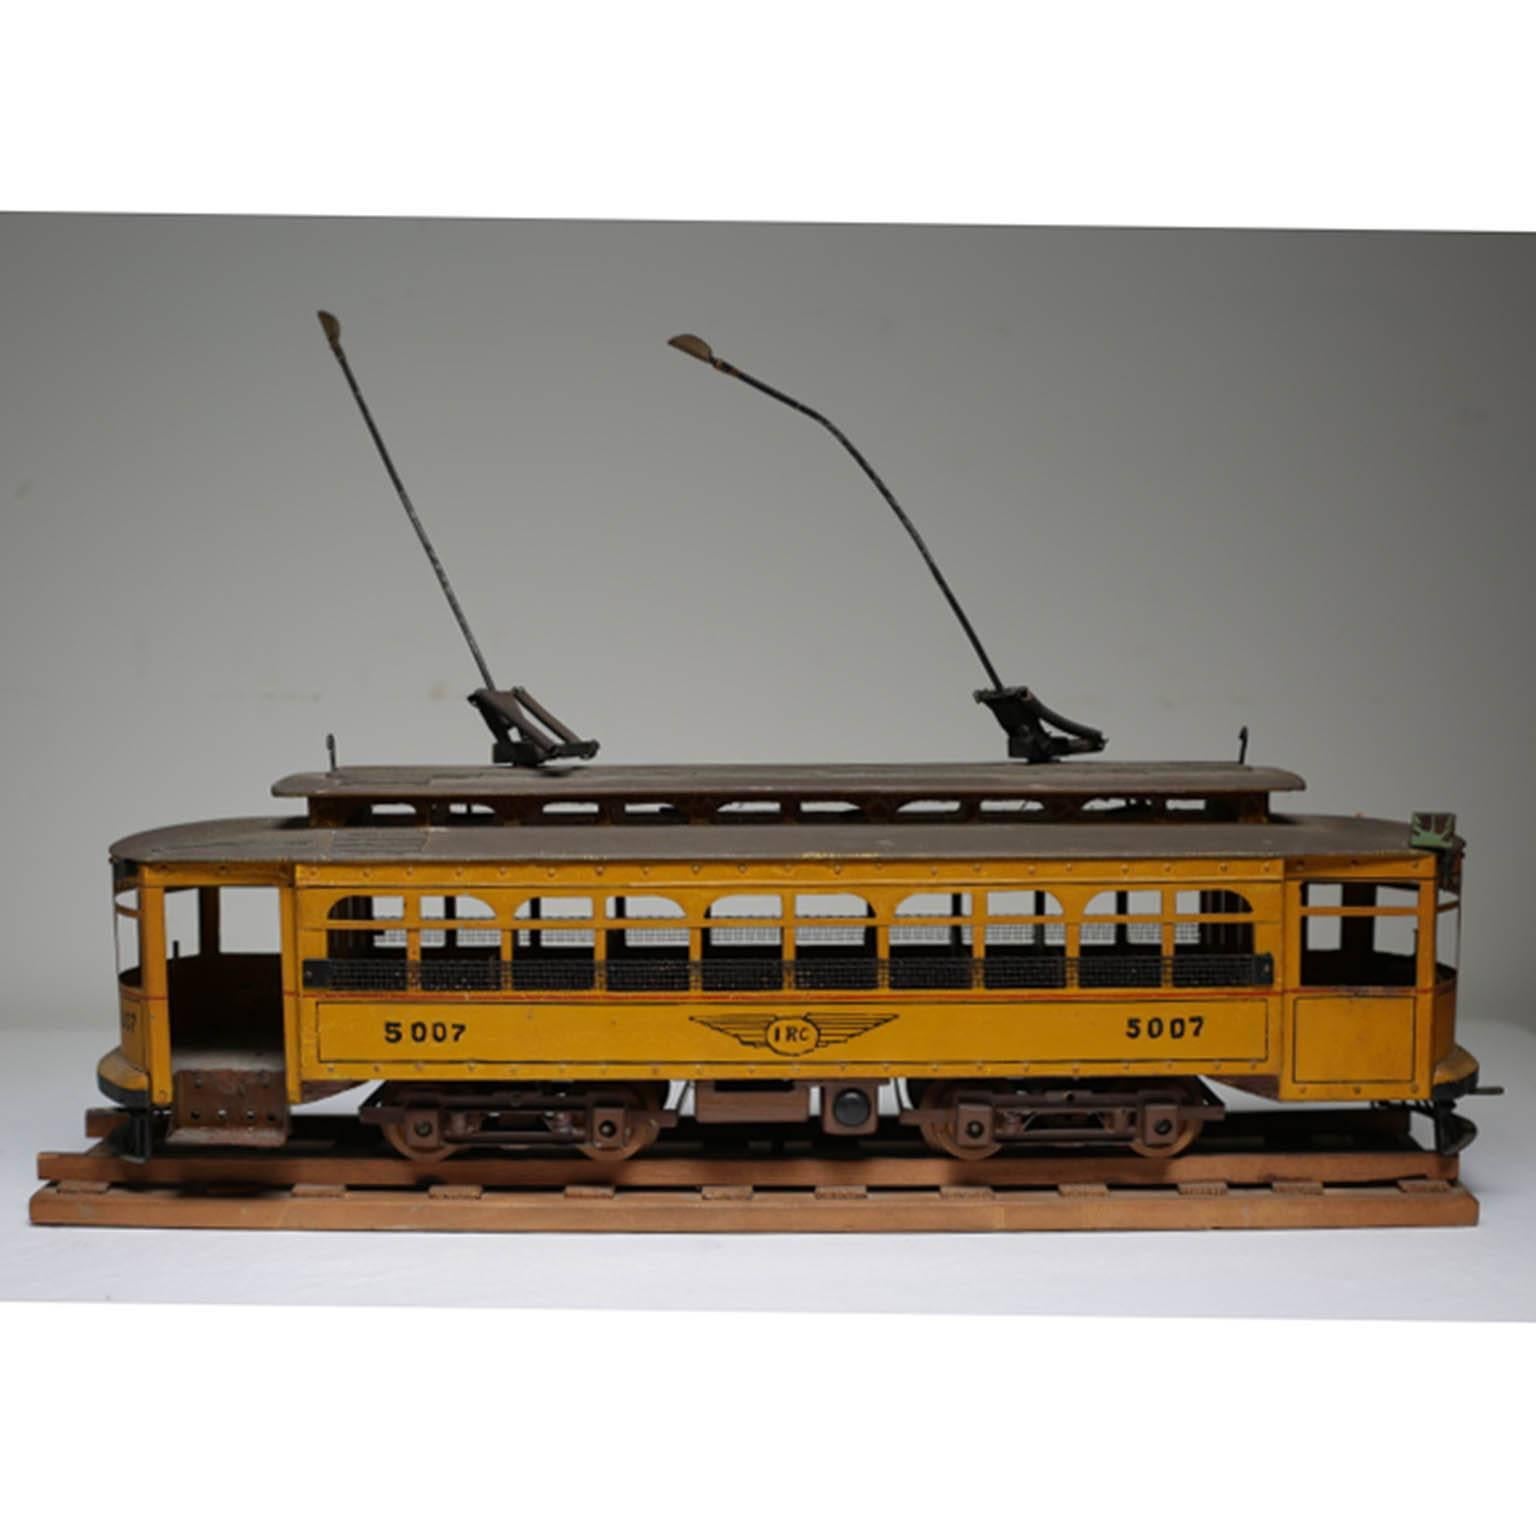 Handmade metal streetcar model mounted on wood. Highly detailed. Signed by artist.